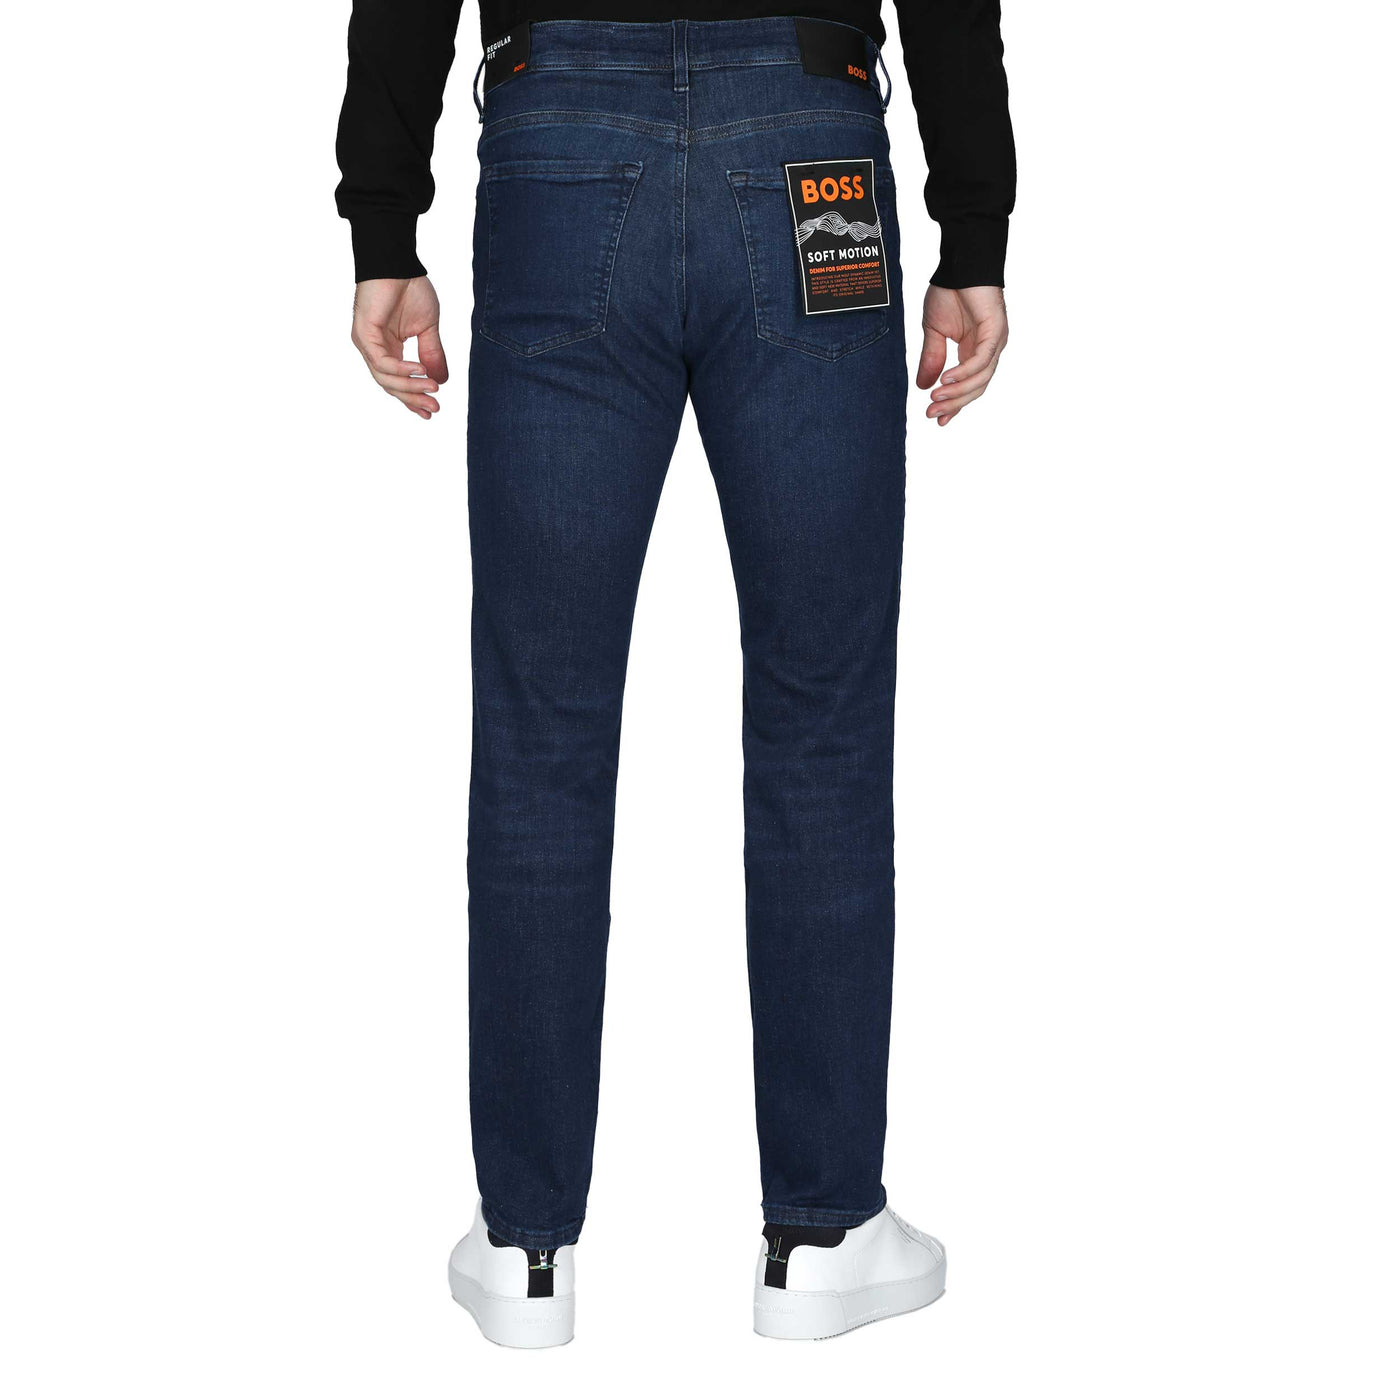 BOSS Re Maine BC P Jean in Dark Blue Back